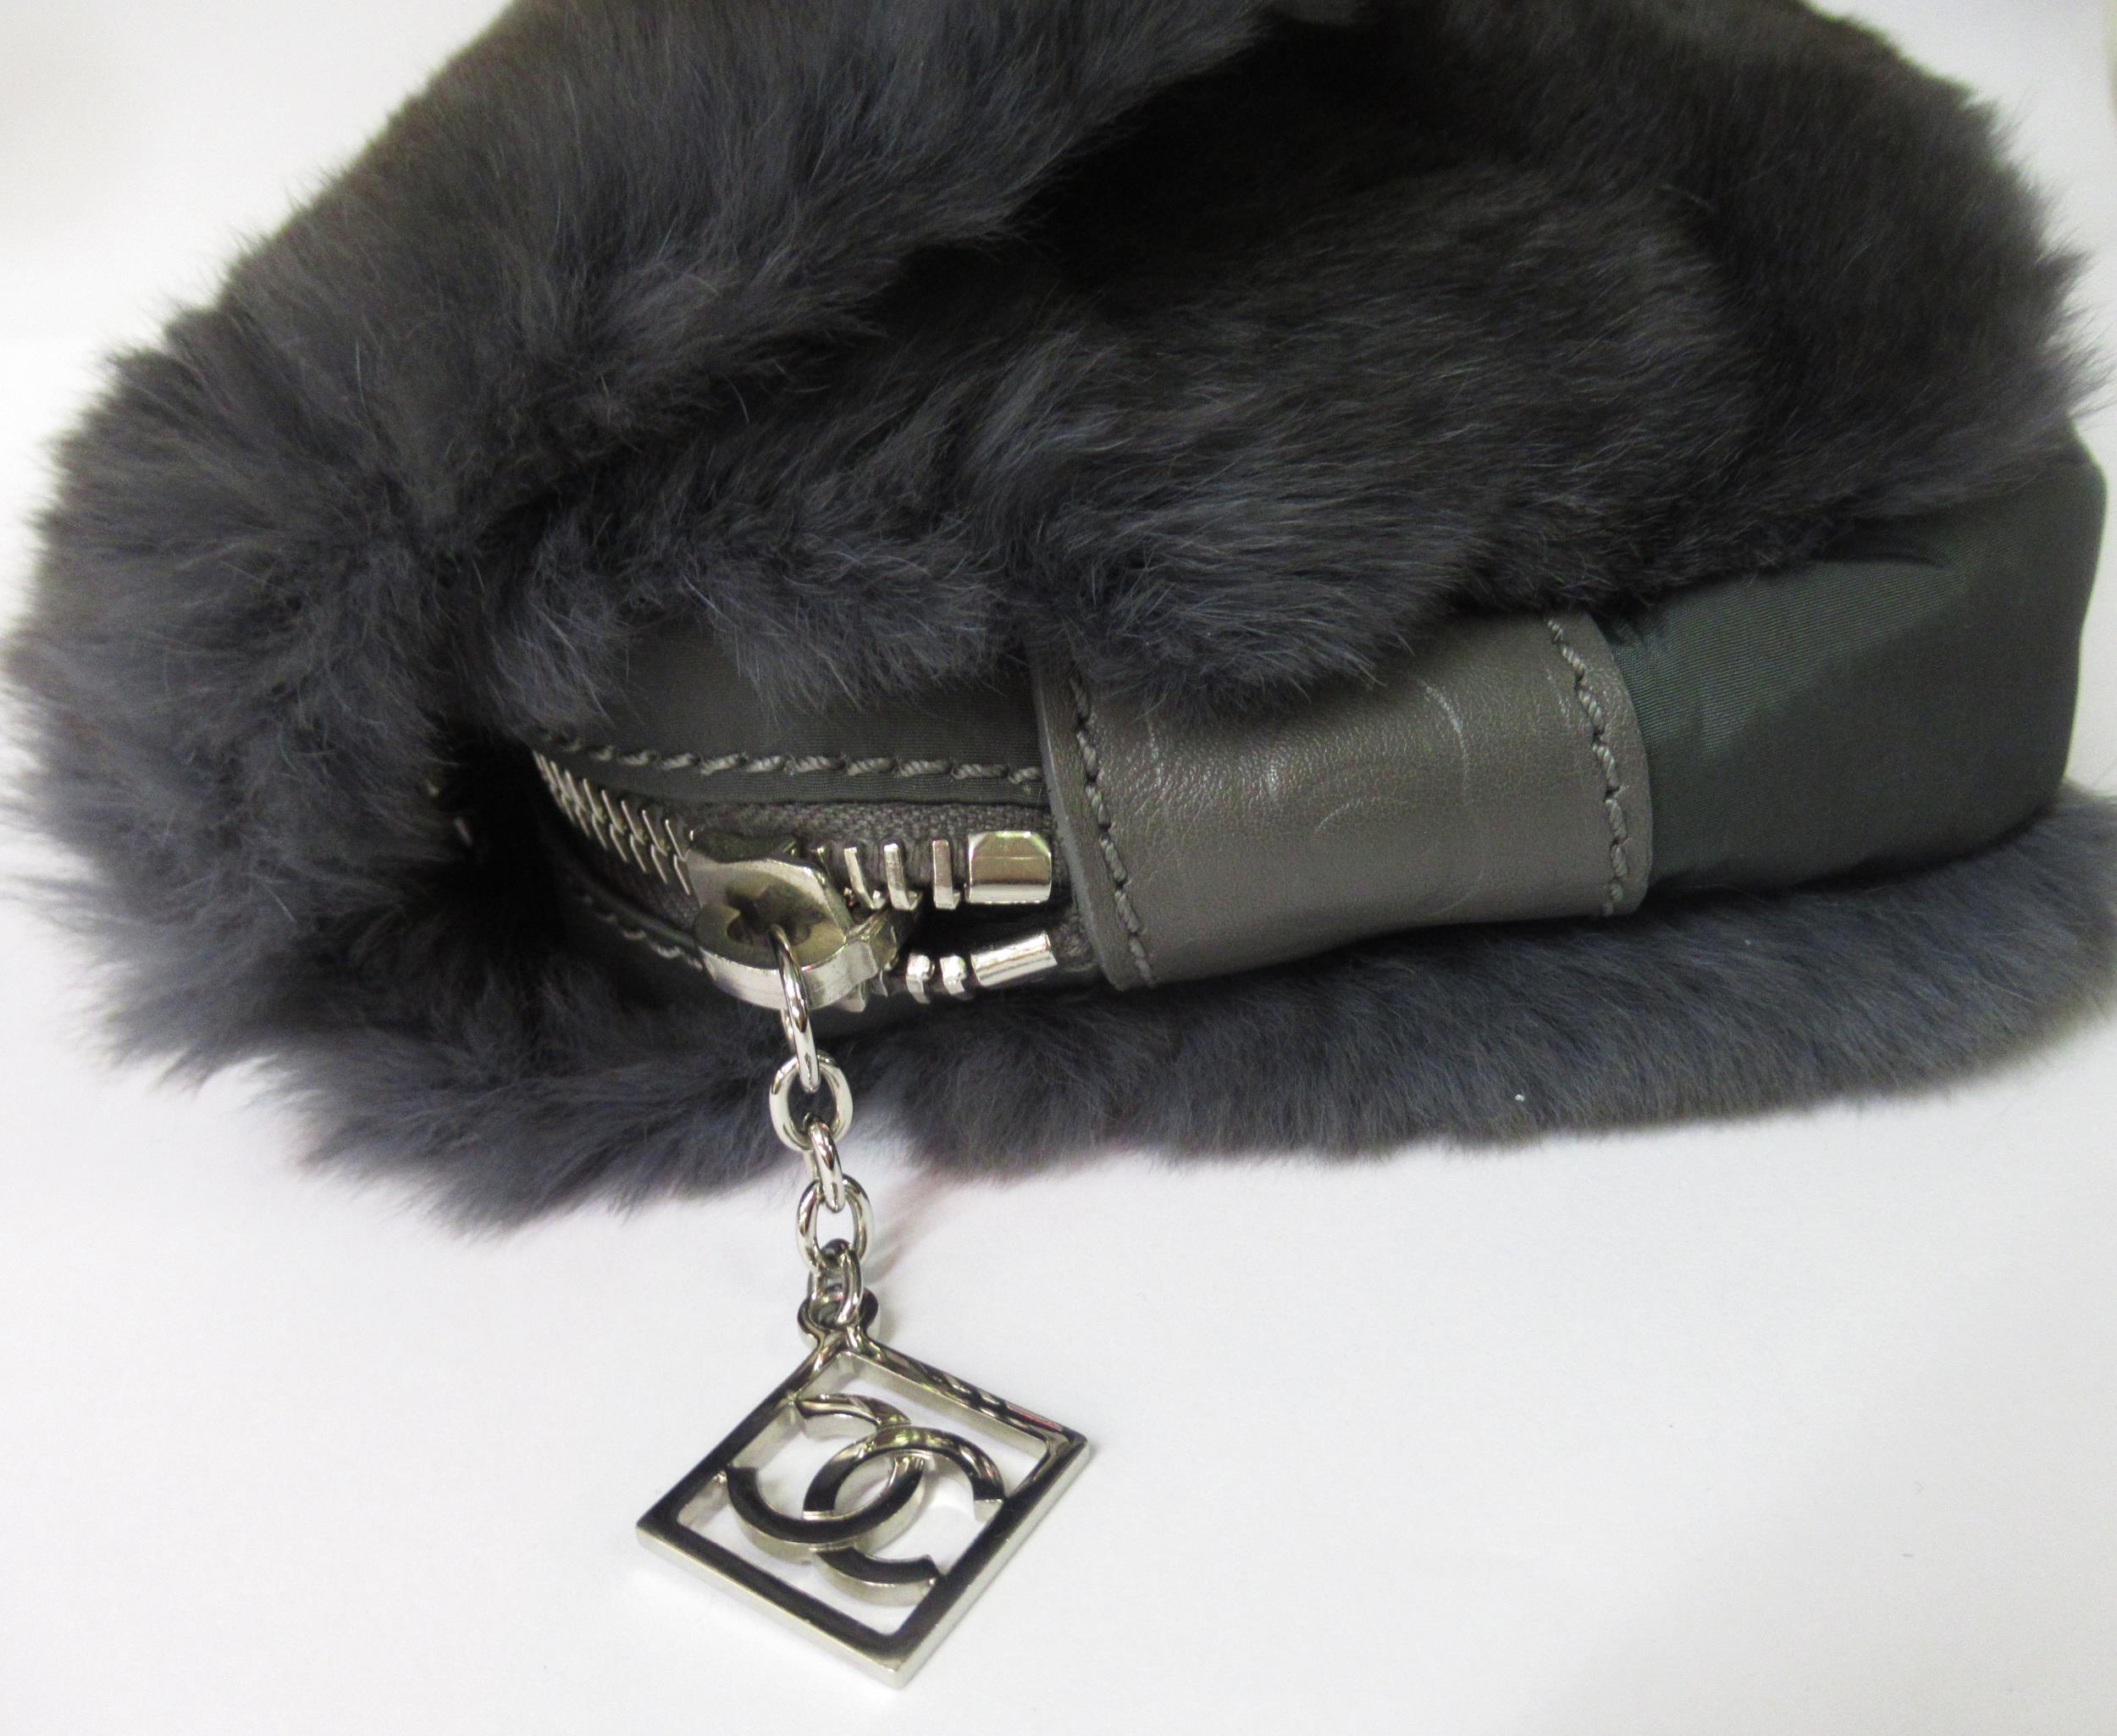 Chanel, 2005 / 2006 Limited Edition rabbit fur classic flap shoulder bag with silver tone hardware - Image 4 of 8